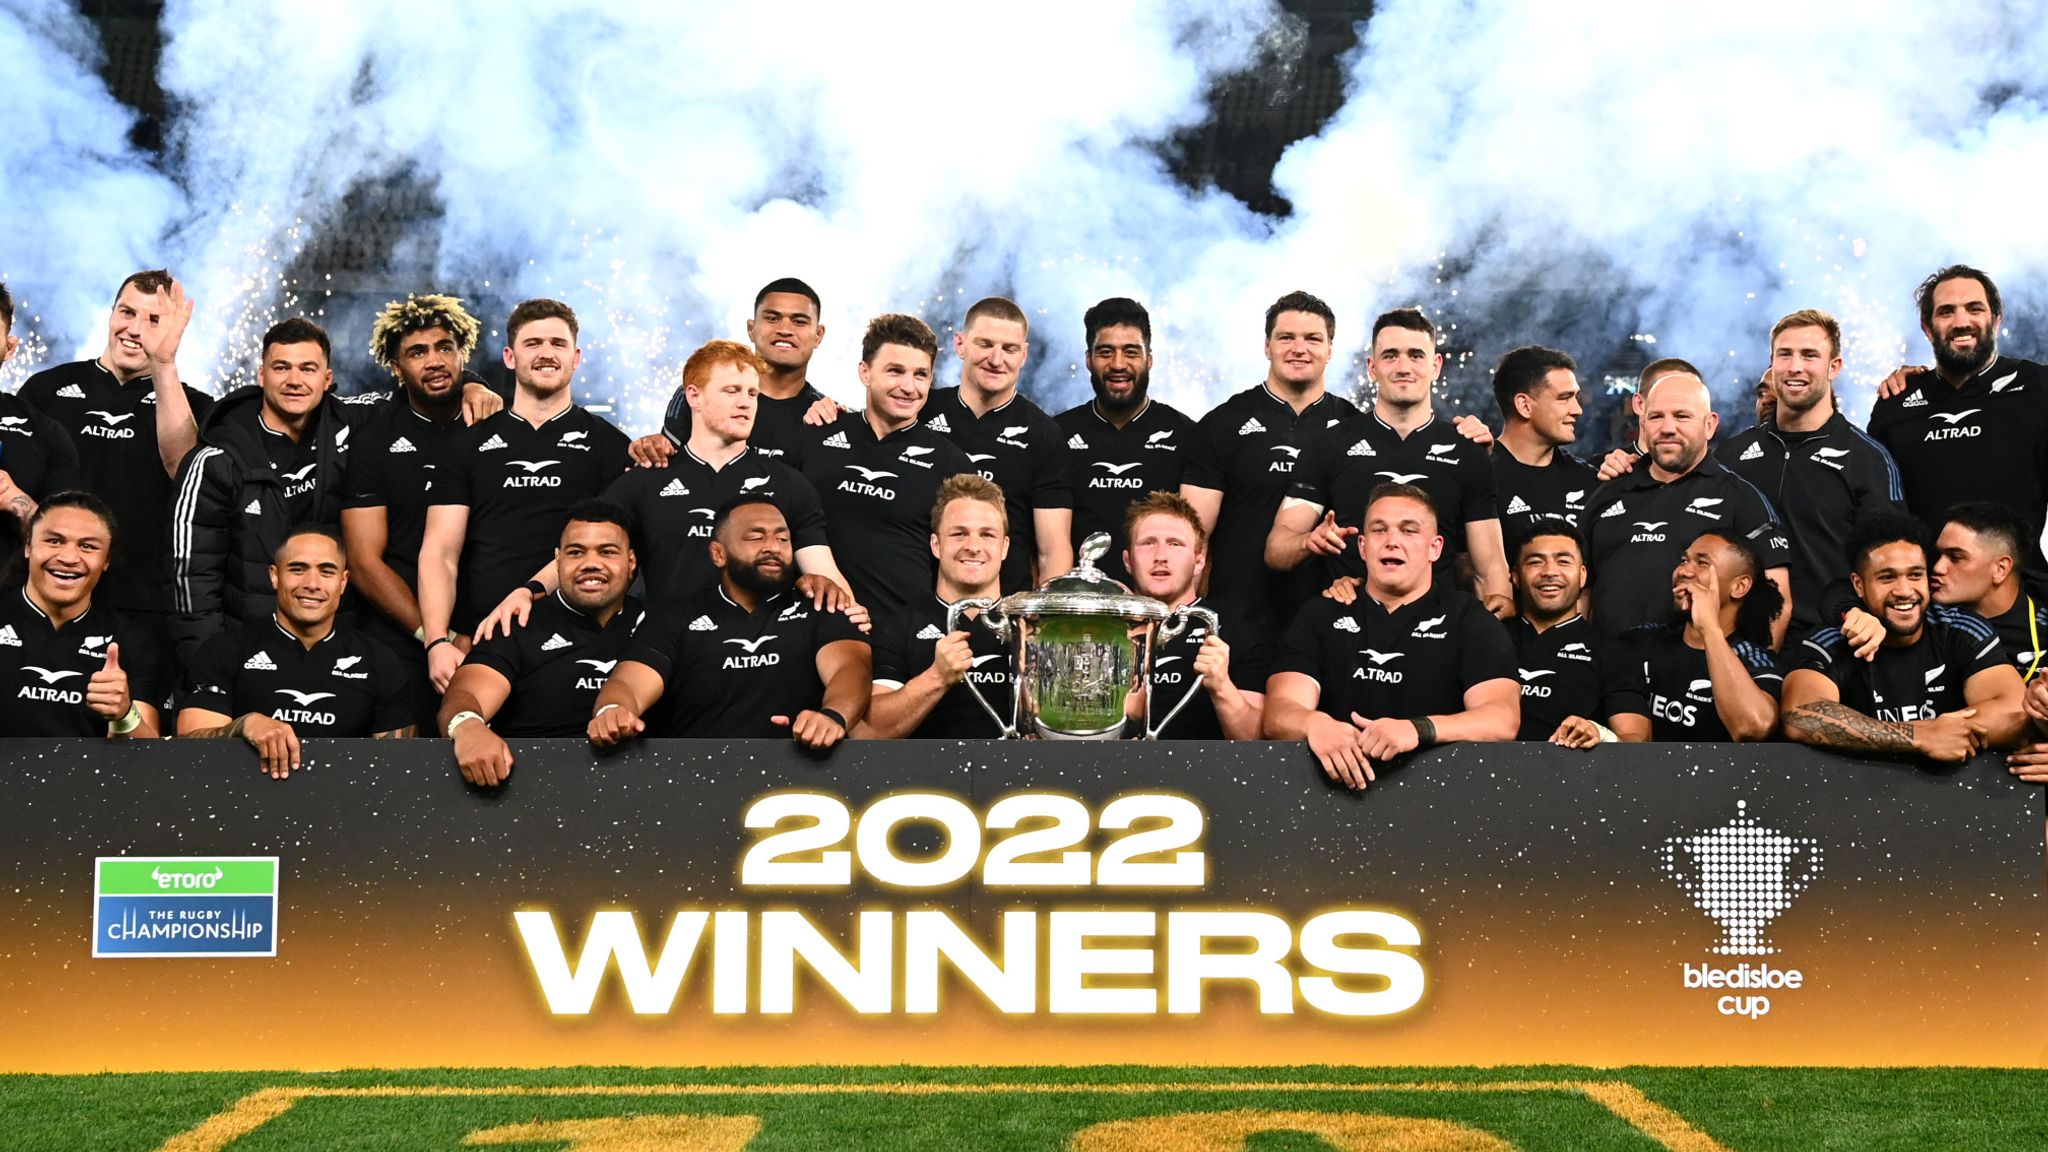 Watch: All Blacks 2023 World Cup squad named